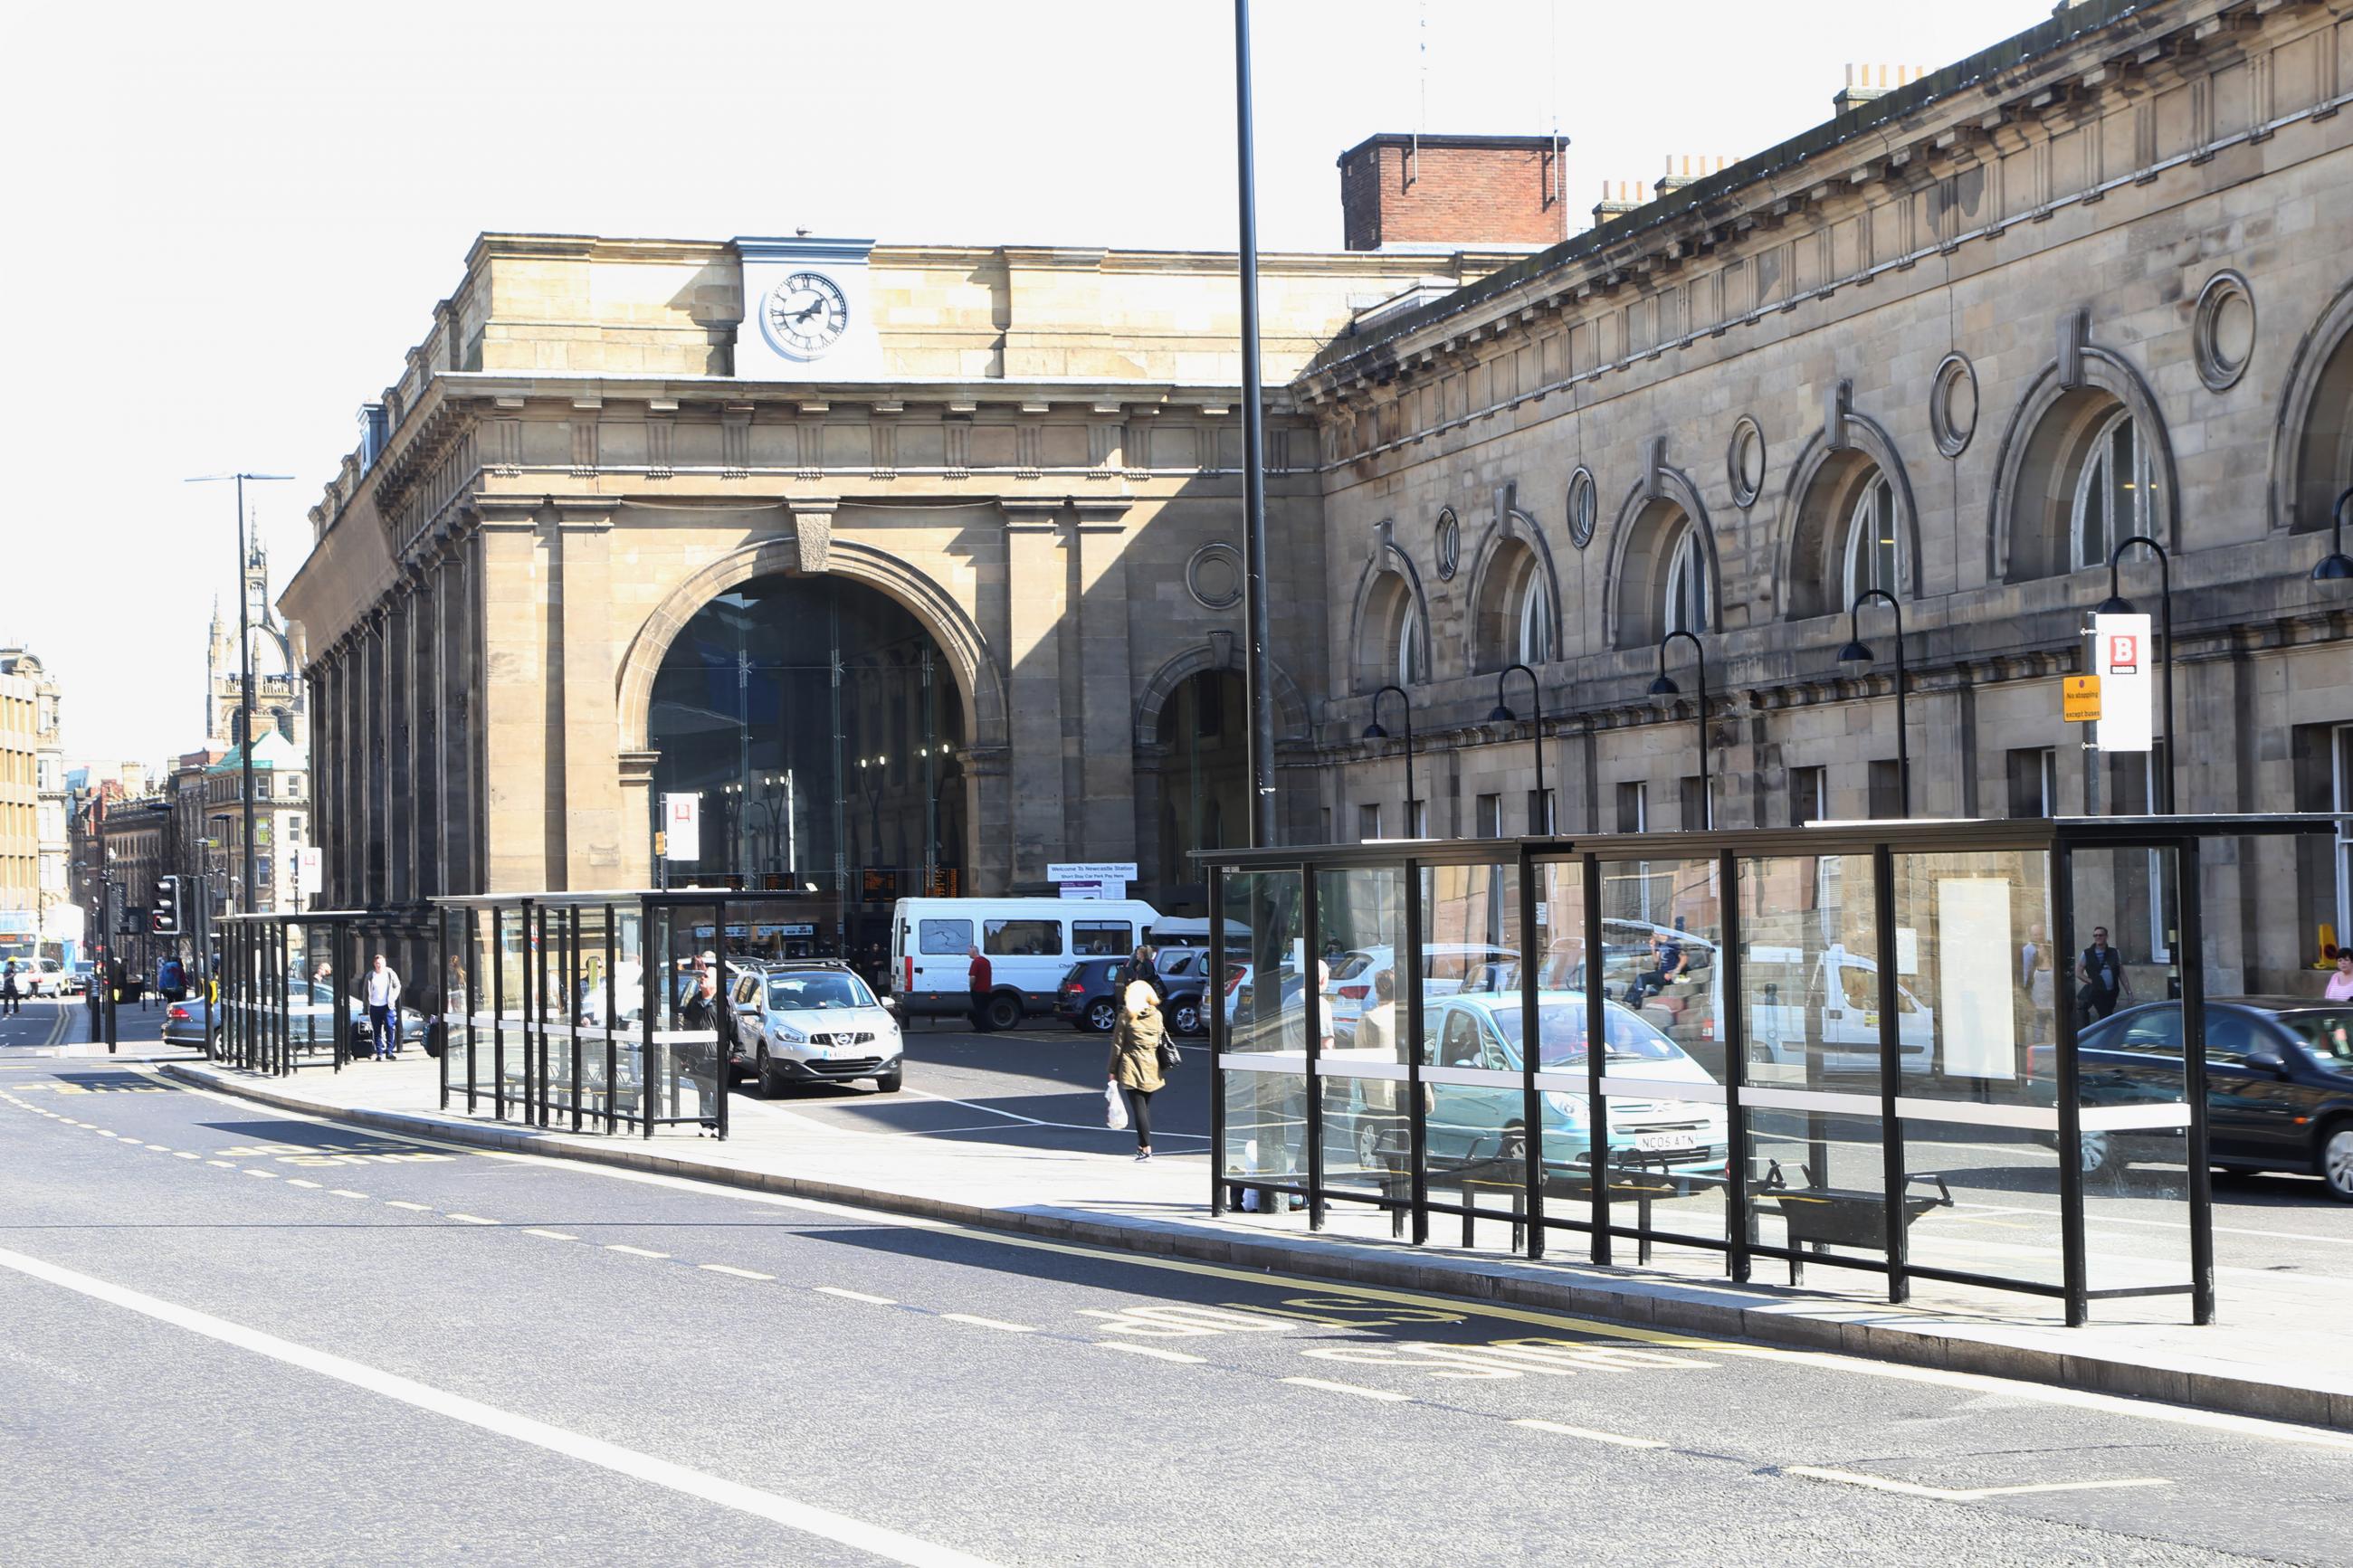 Photo showing the front of central station